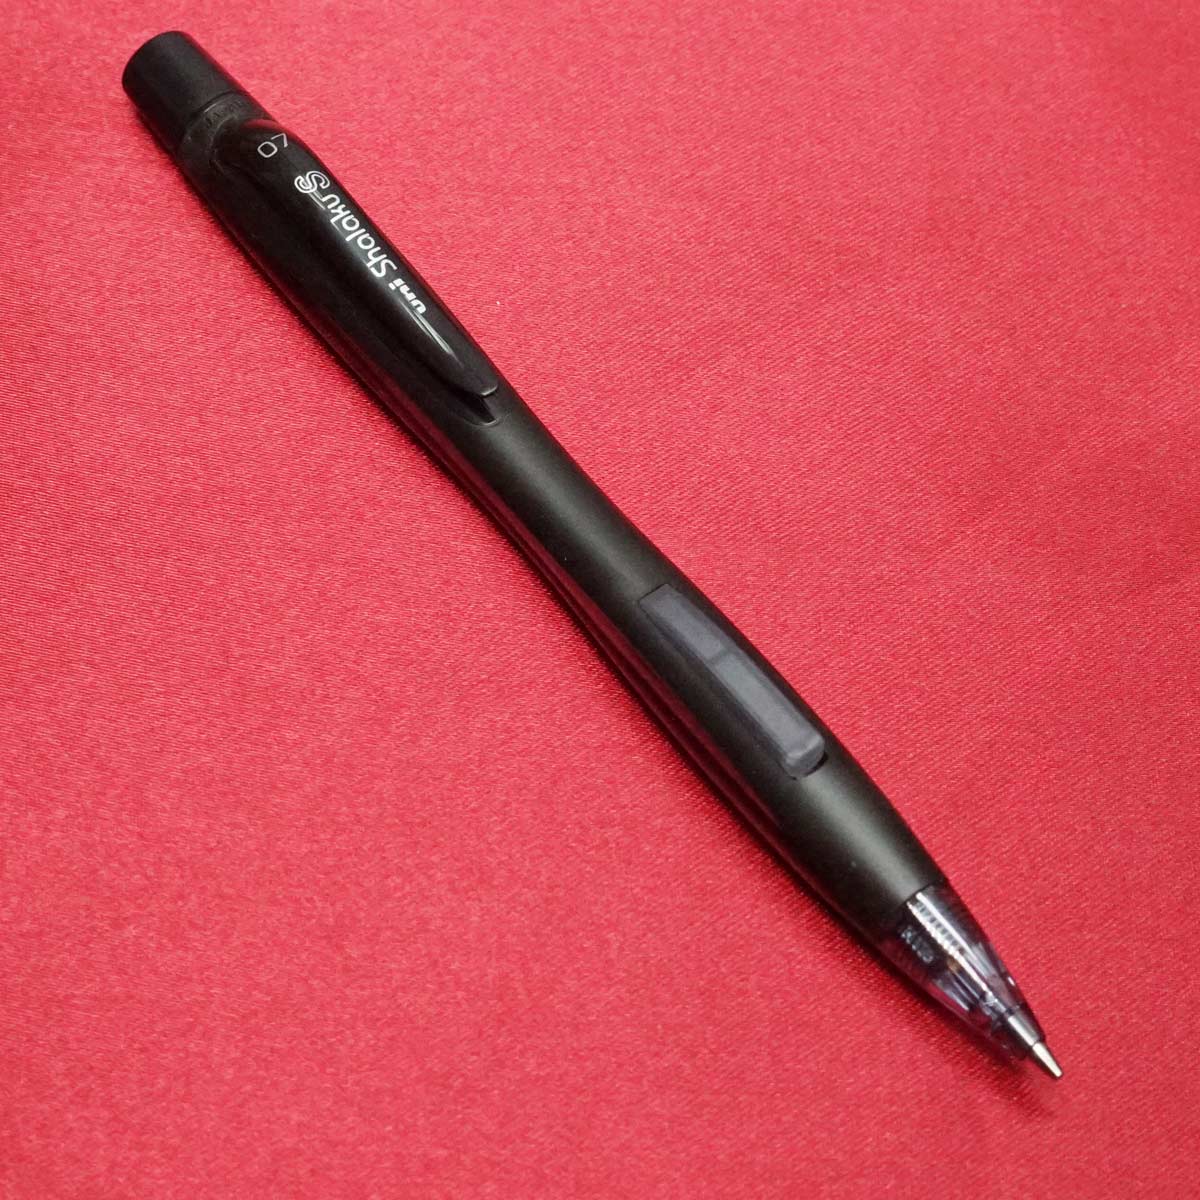 Uniball Shalaku Black Color Body With 0.7mm Tip Front Click Type Led Pencil SKU 21375